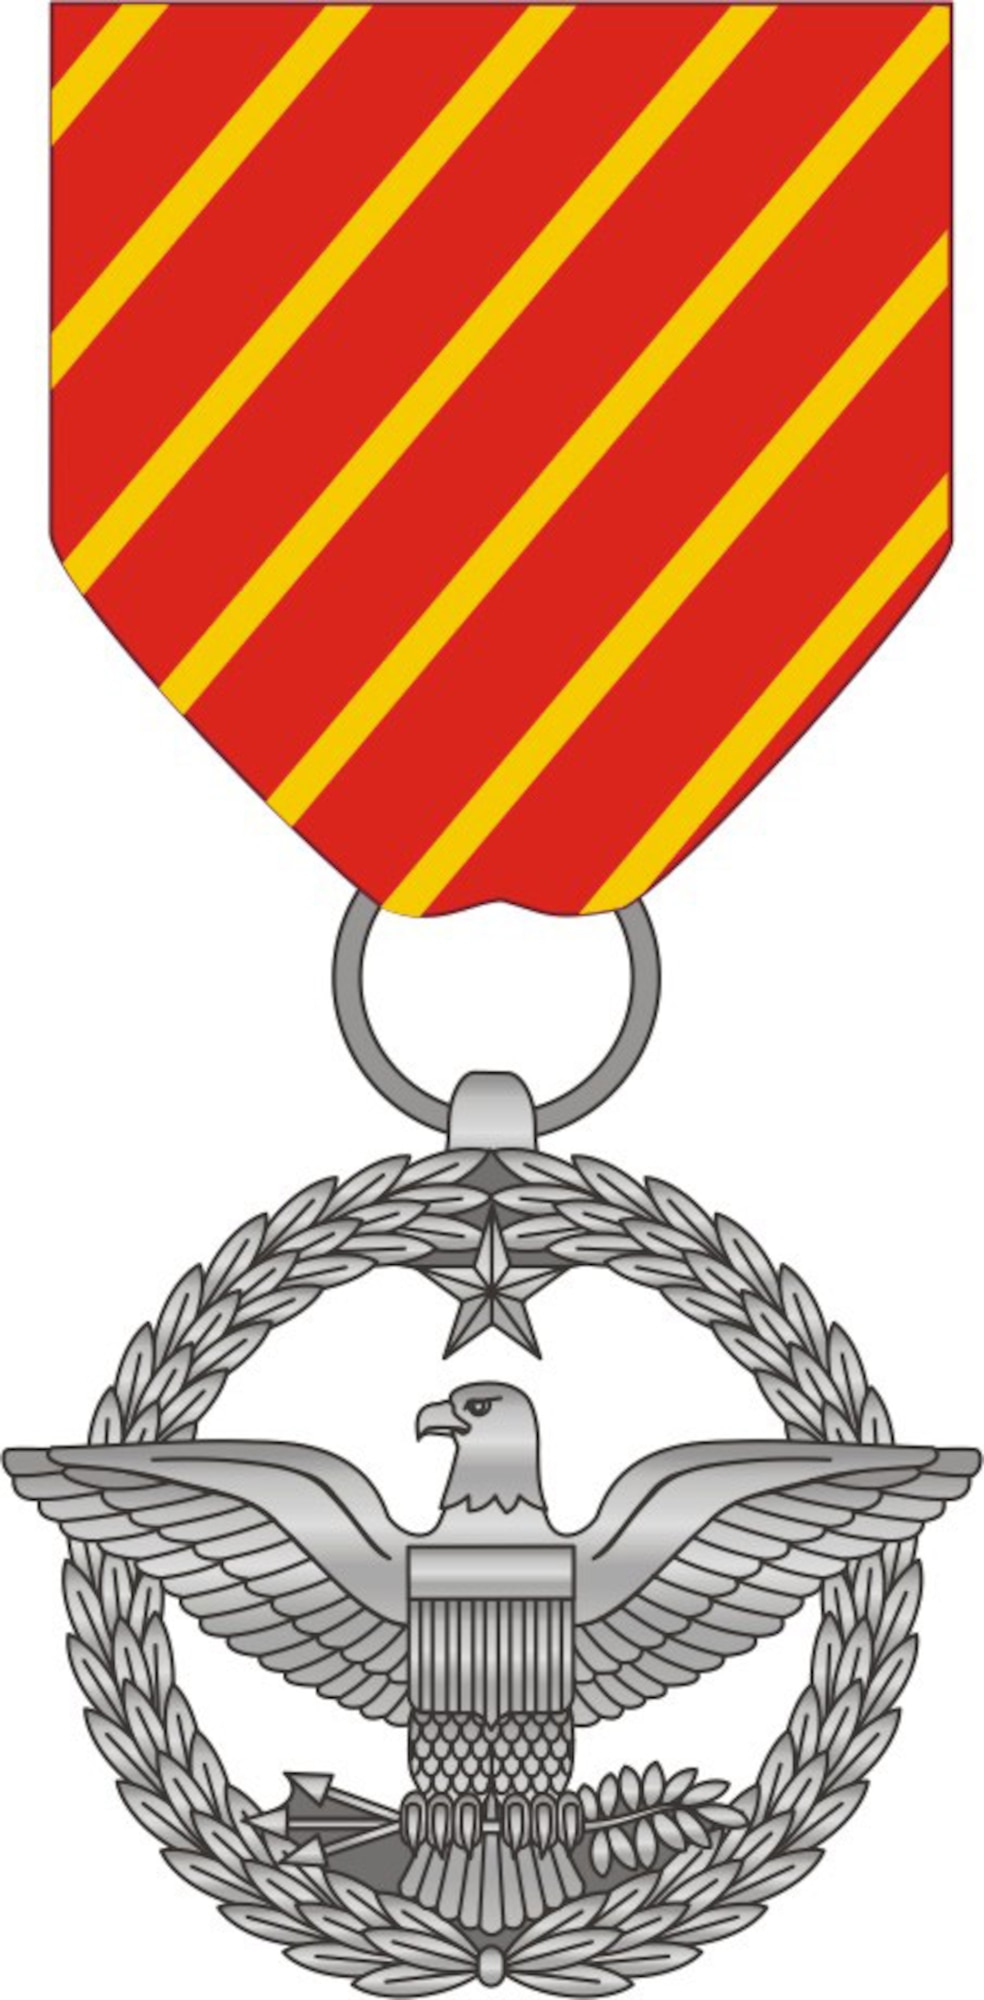 Air Force combat action medal, front view. (U.S. Air Force graphic)